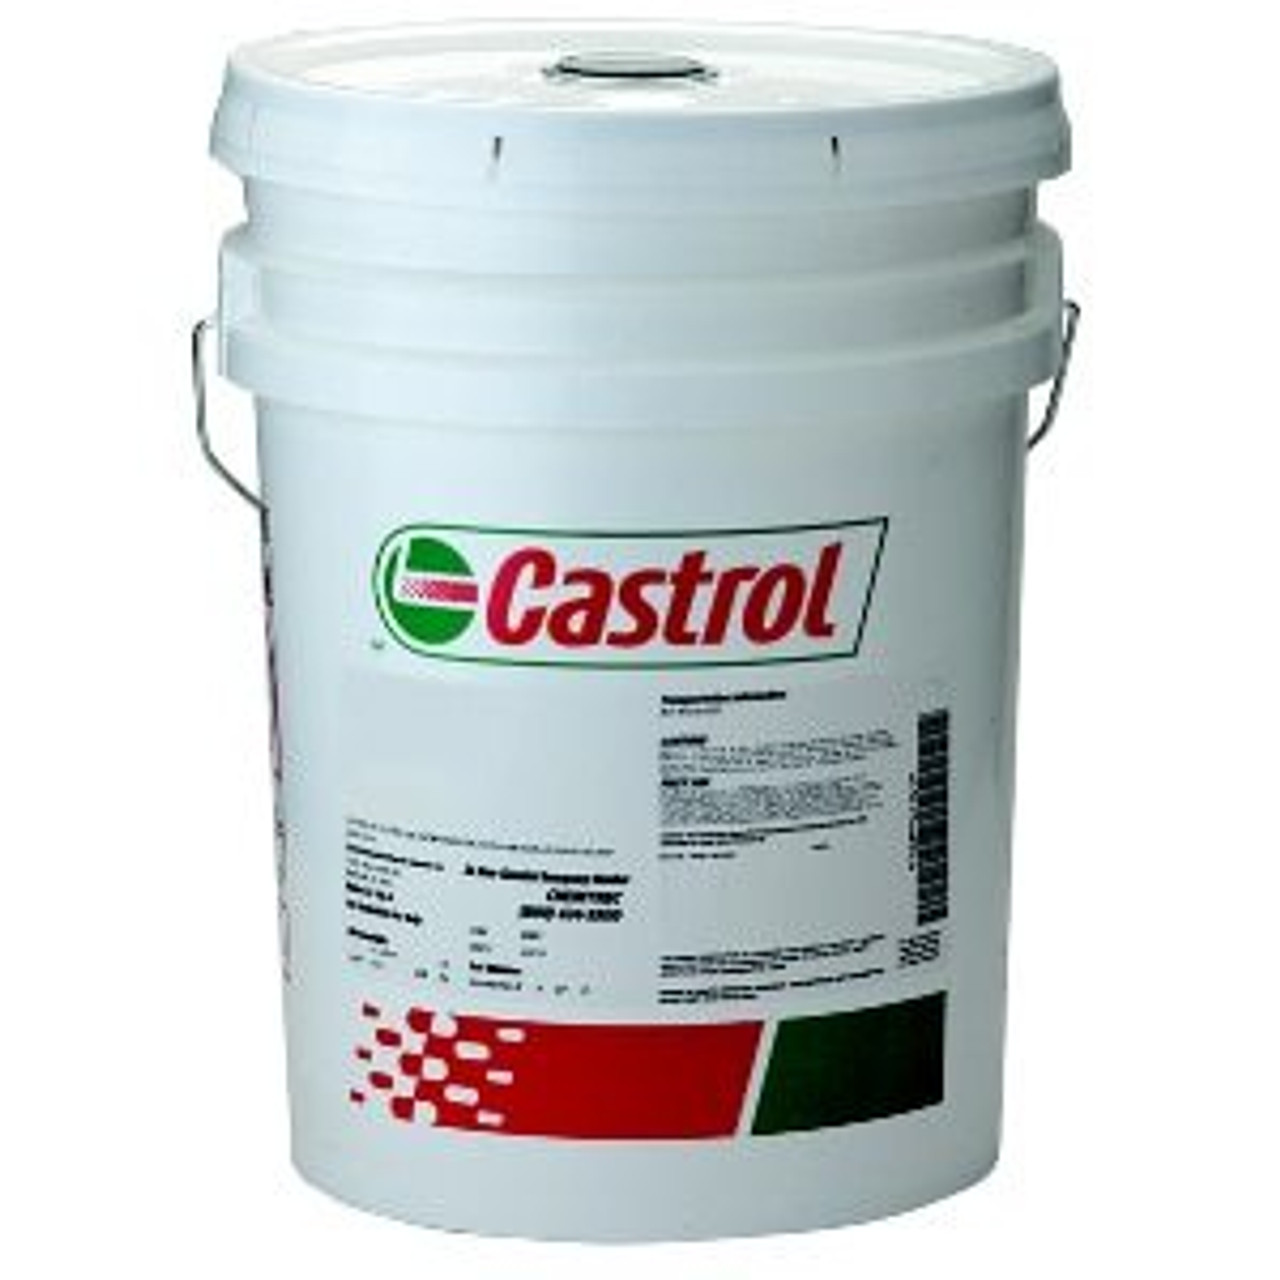 Castrol Optileb CH 150 Fully Synthetic Chain Lubricant NSF H1 Authorized (formally Viscoleb 150) - 37 Lb Pail